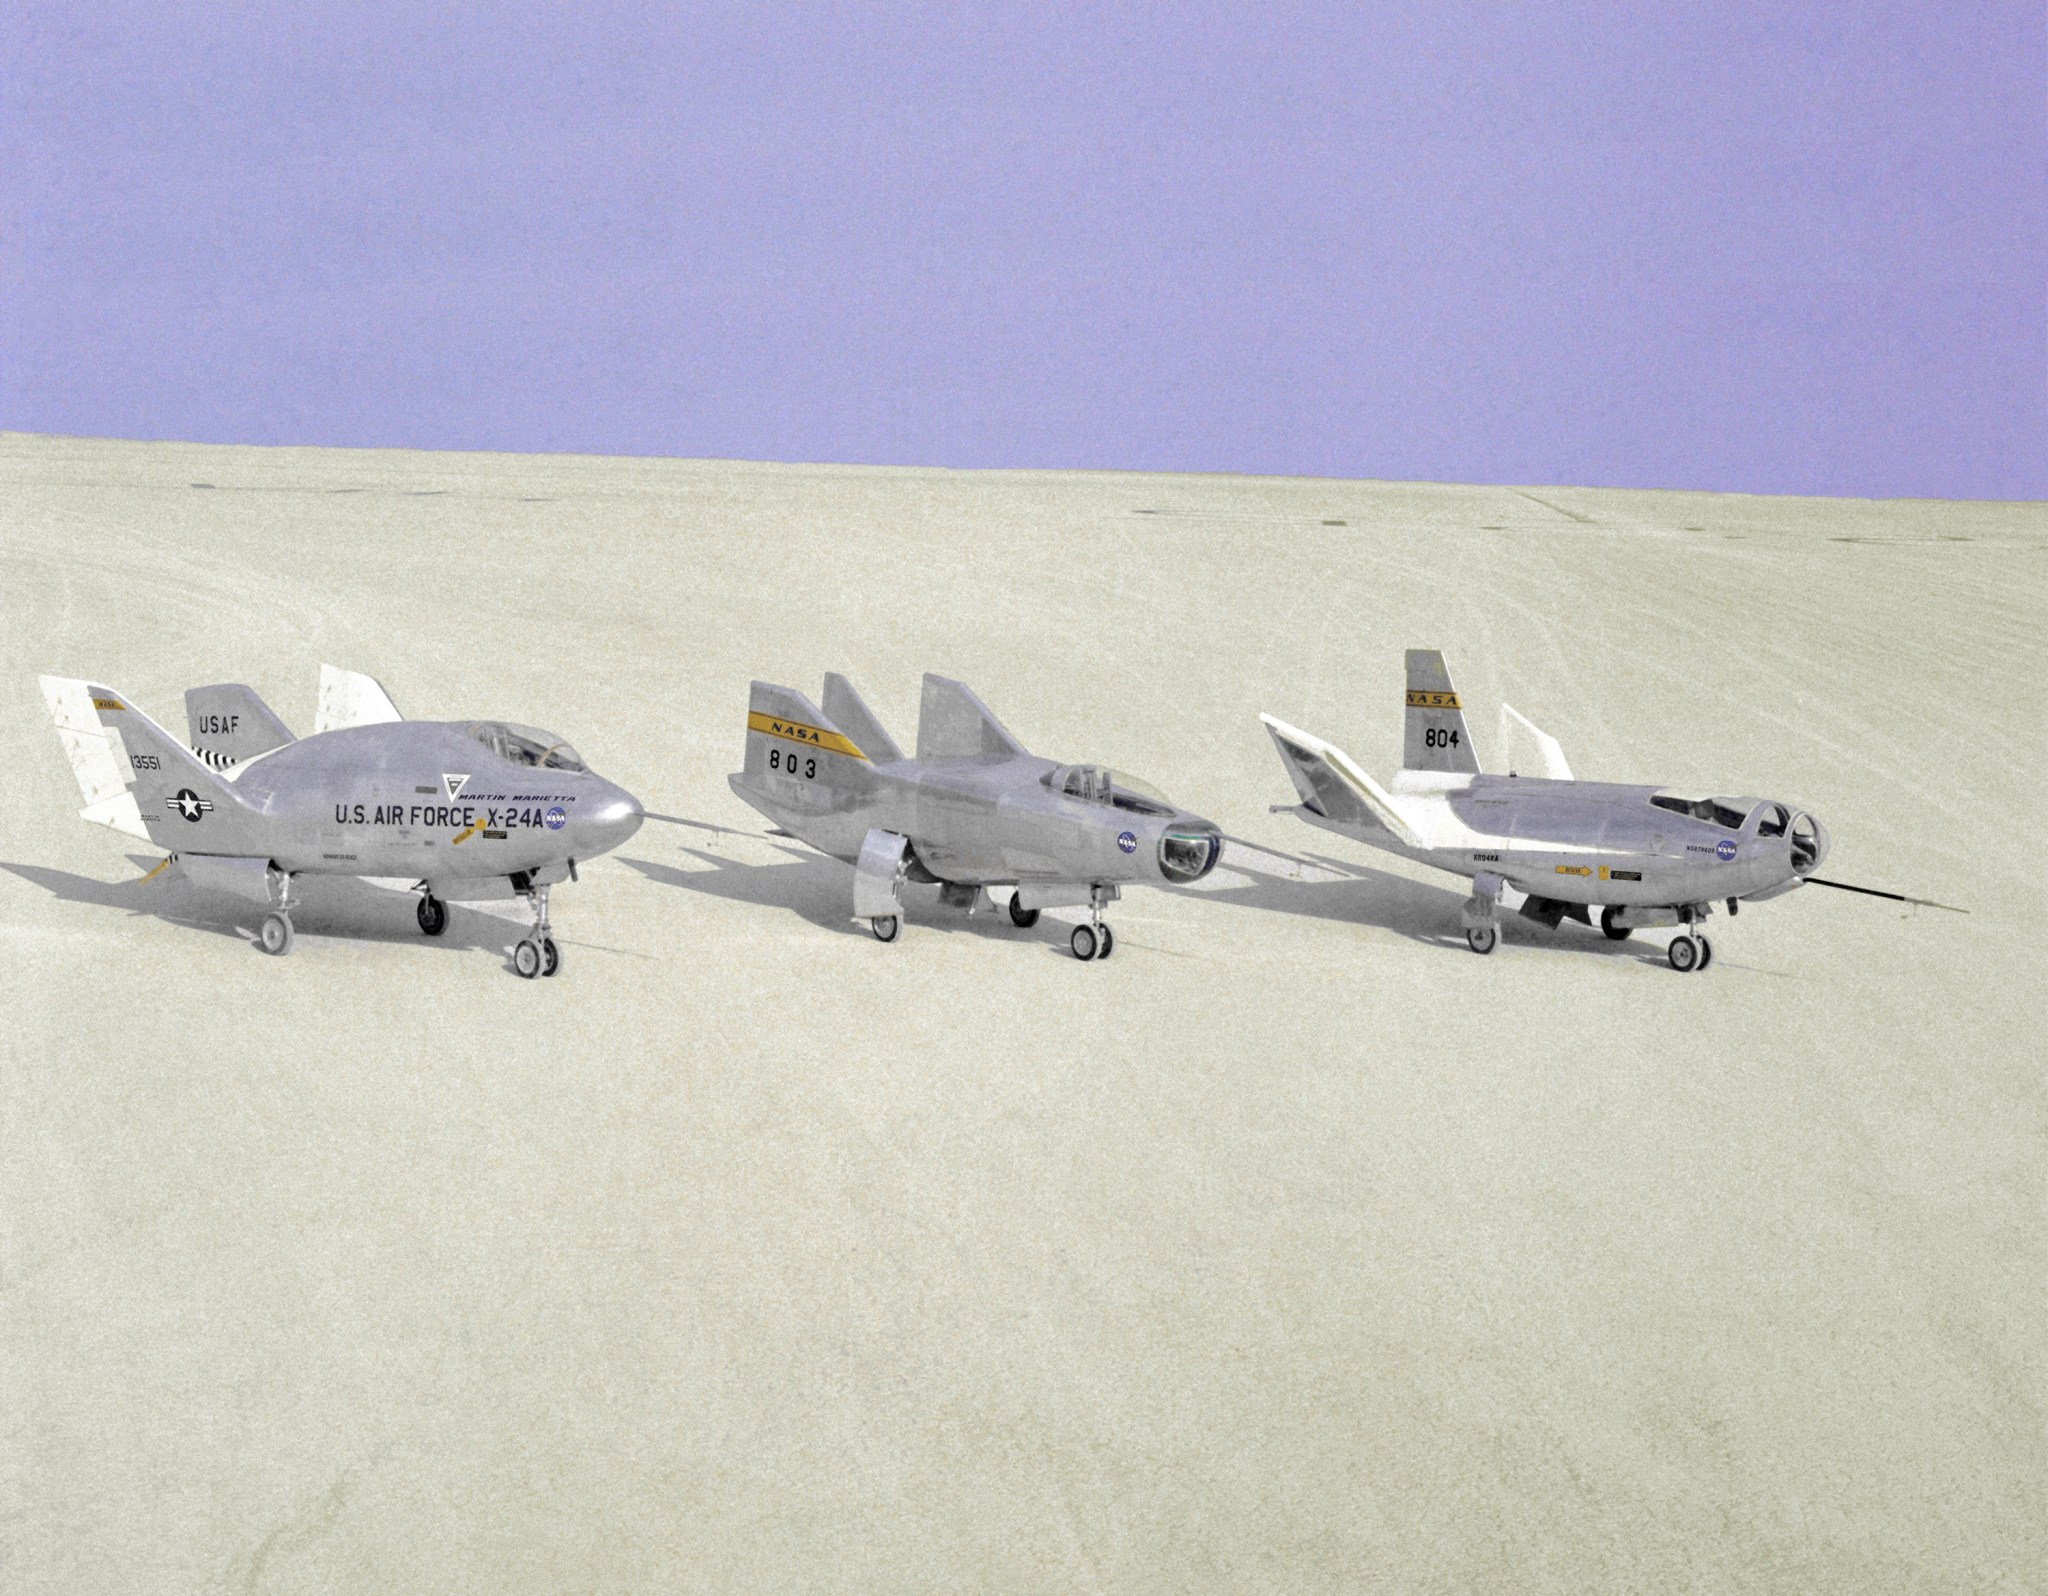 Sitting on the dry lakebed at Edwards Air Force Base in 1968 are, from left, the X-24A, M2-F3 and the HL-10.